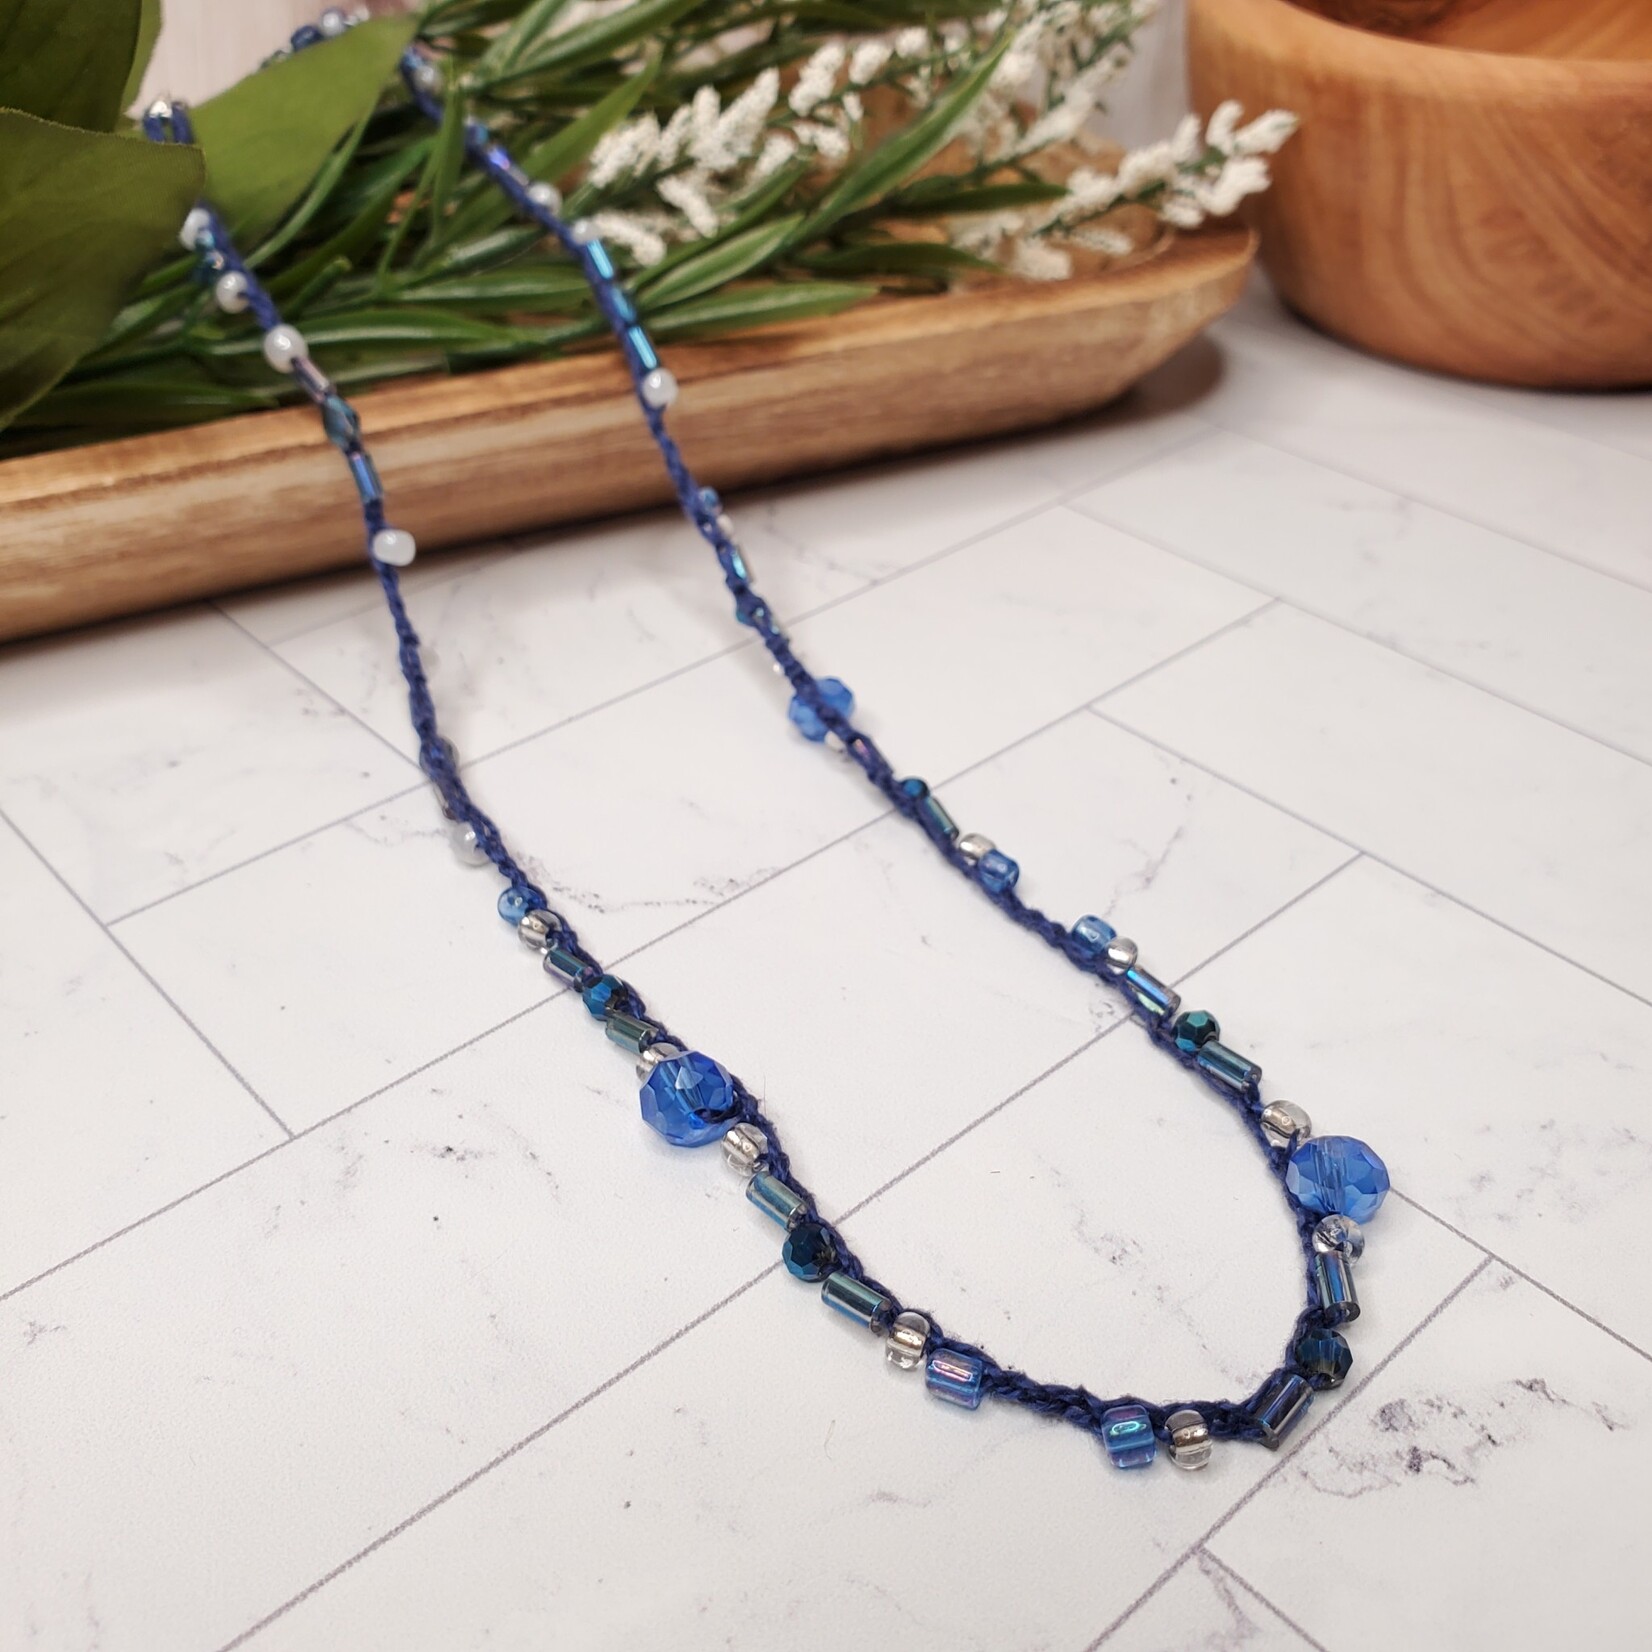 Crocheted Beaded Necklace Pattern